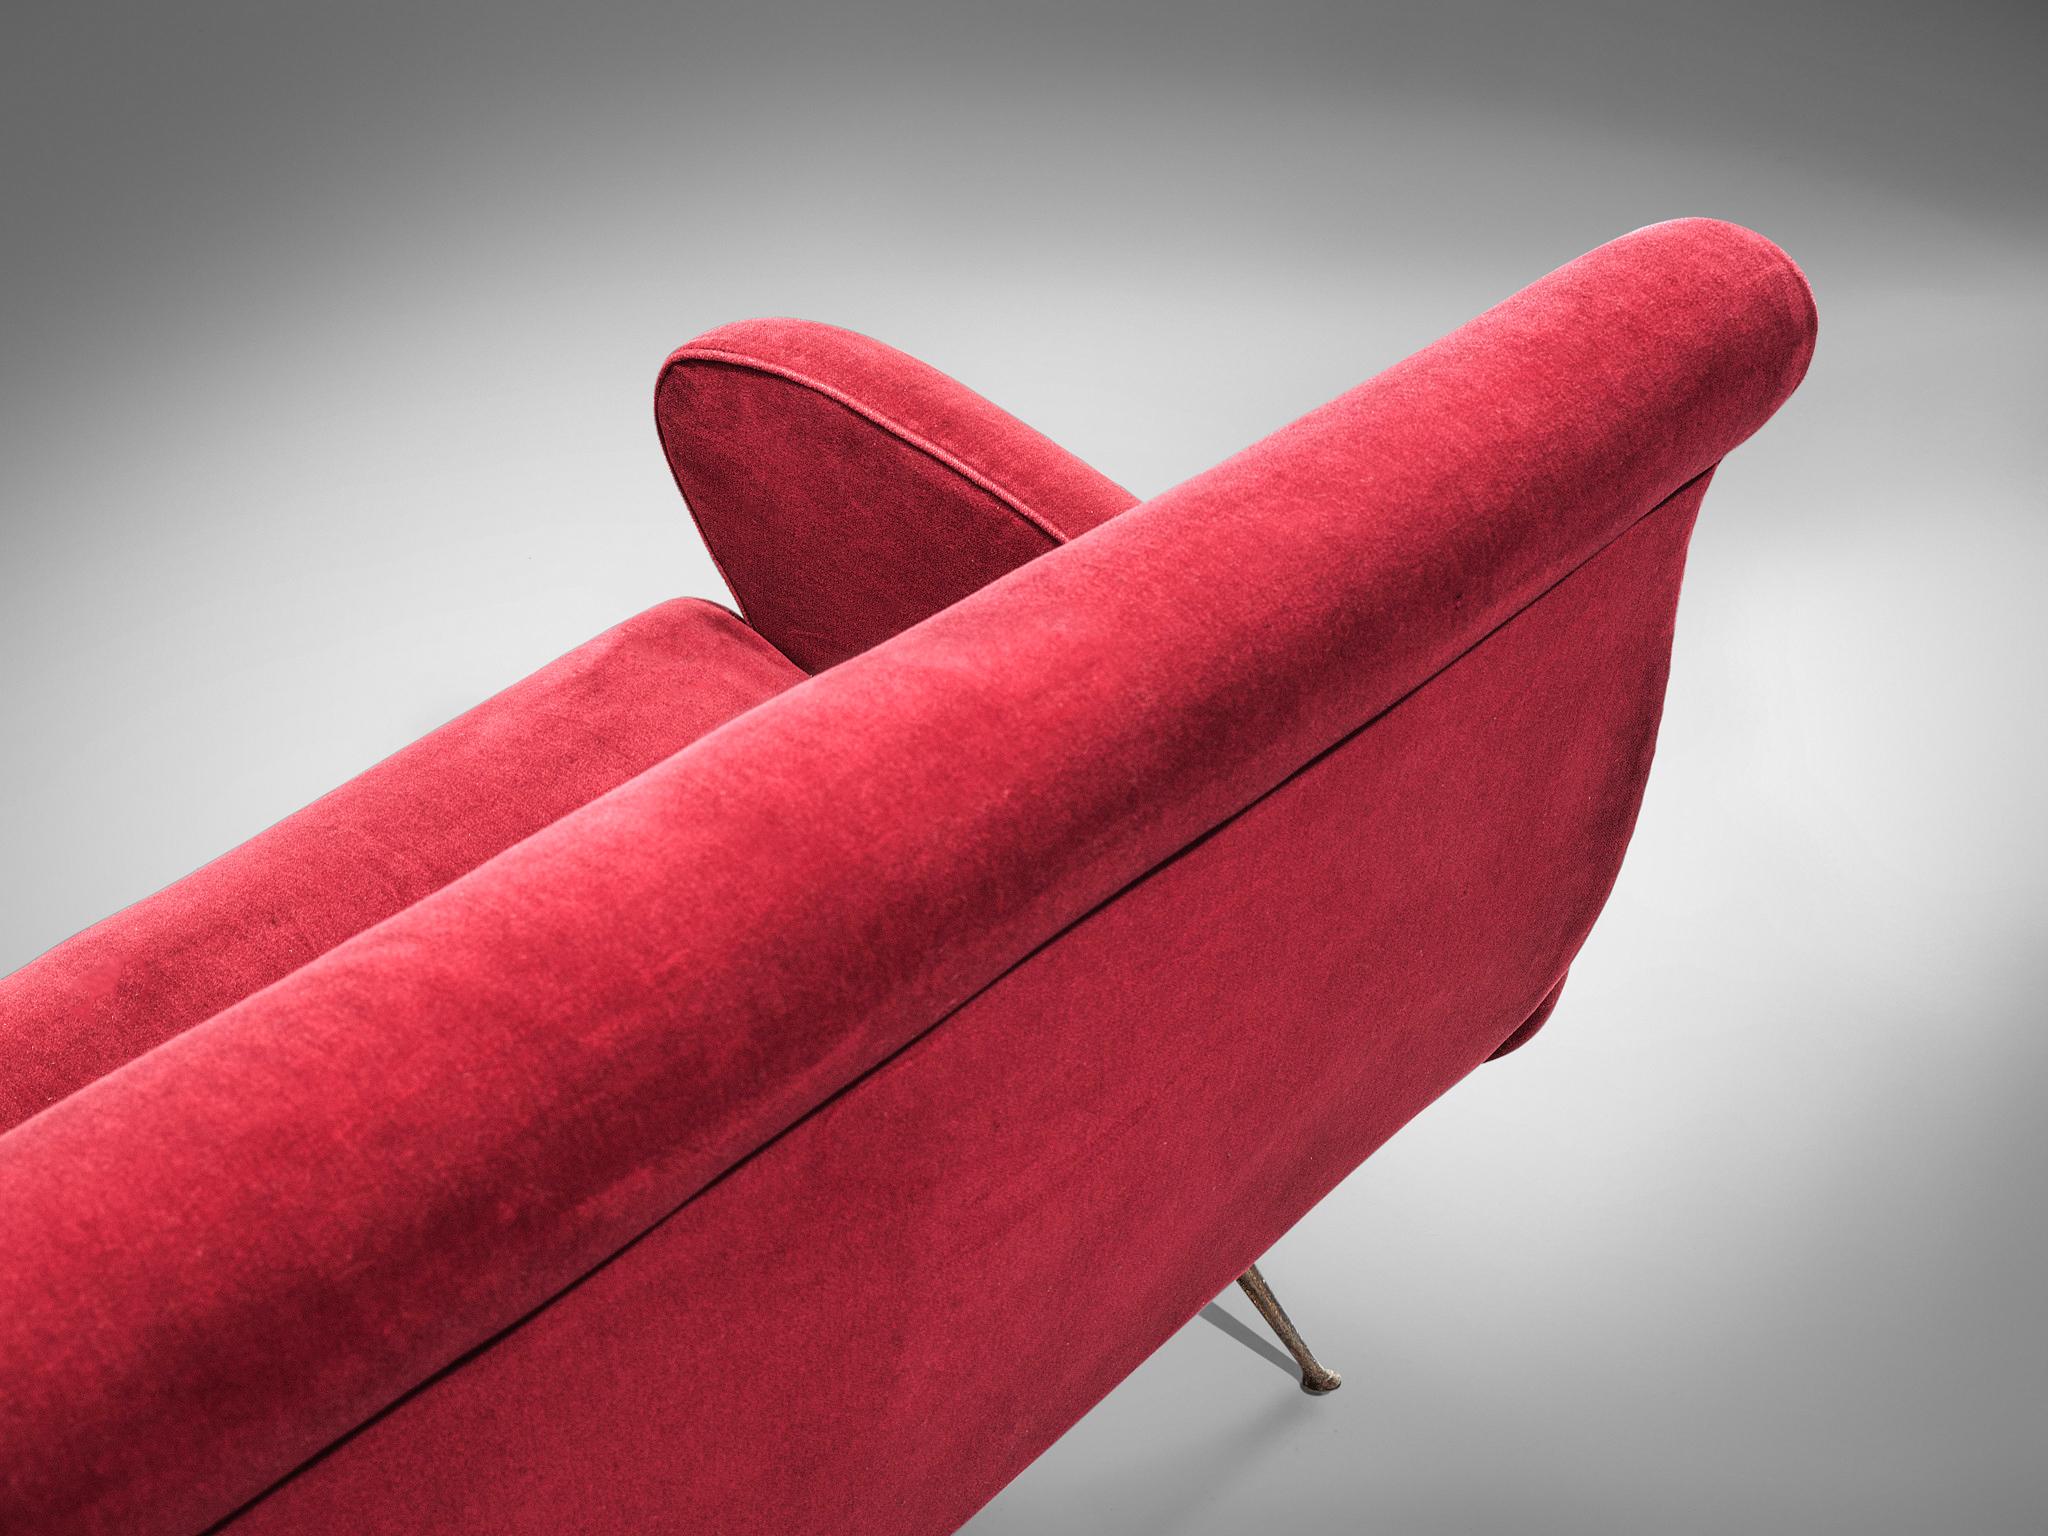 Mid-20th Century Lounge Set in Red Velvet and Brass